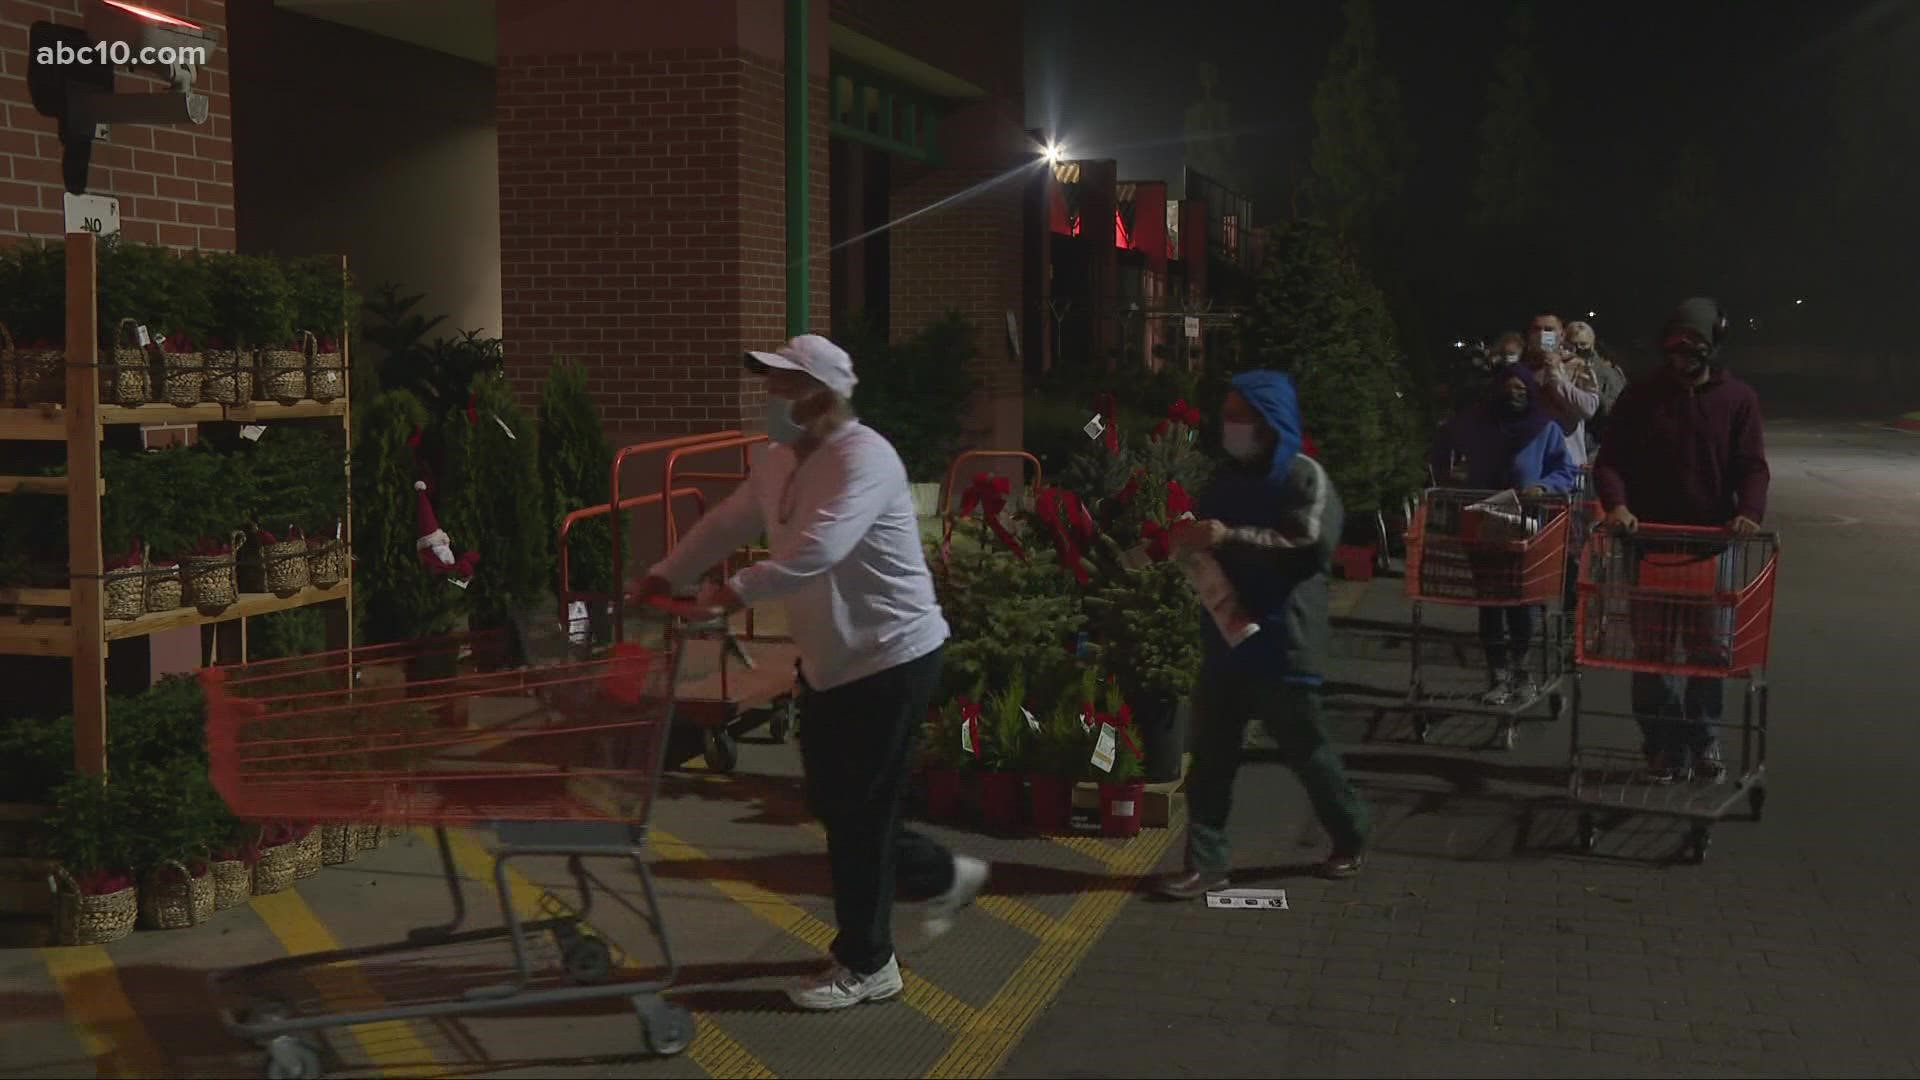 Shoppers were lined up and ready to go early this morning to take advantage of Black Friday deals.